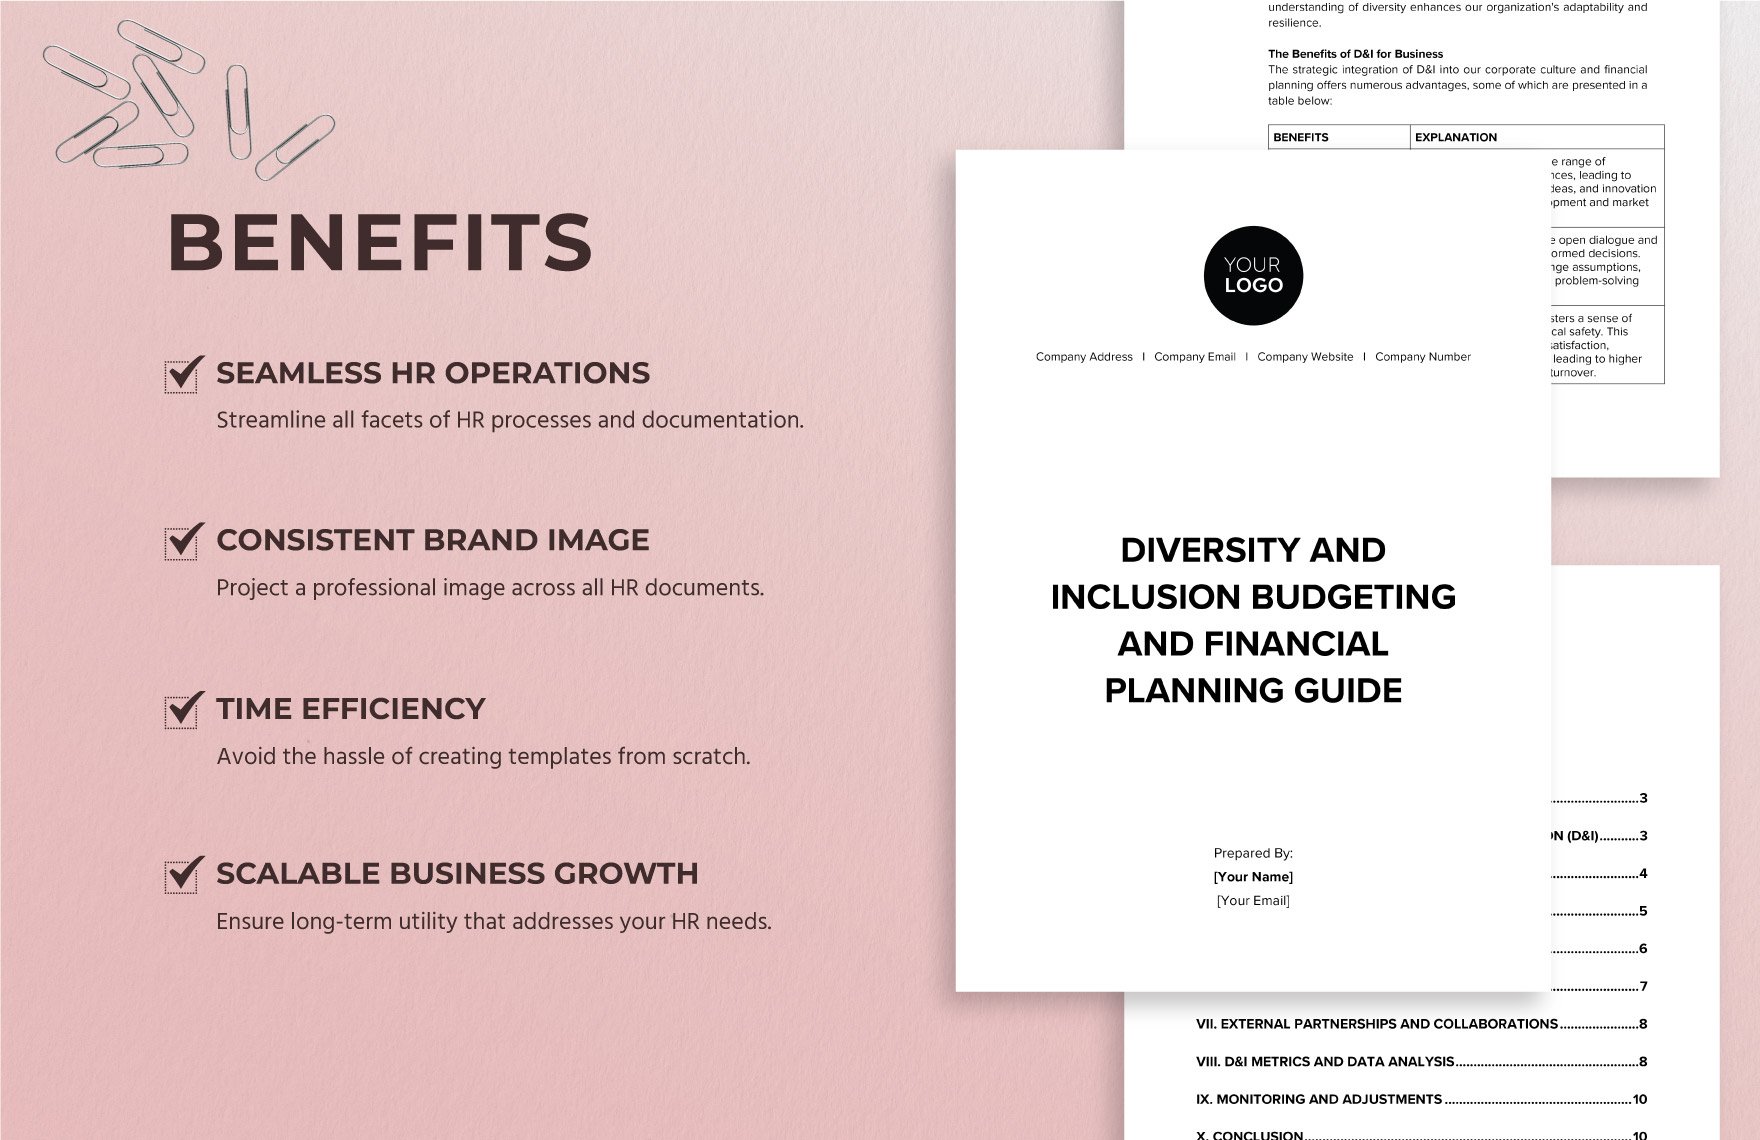 Diversity and Inclusion Budgeting and Financial Planning Guide HR Template